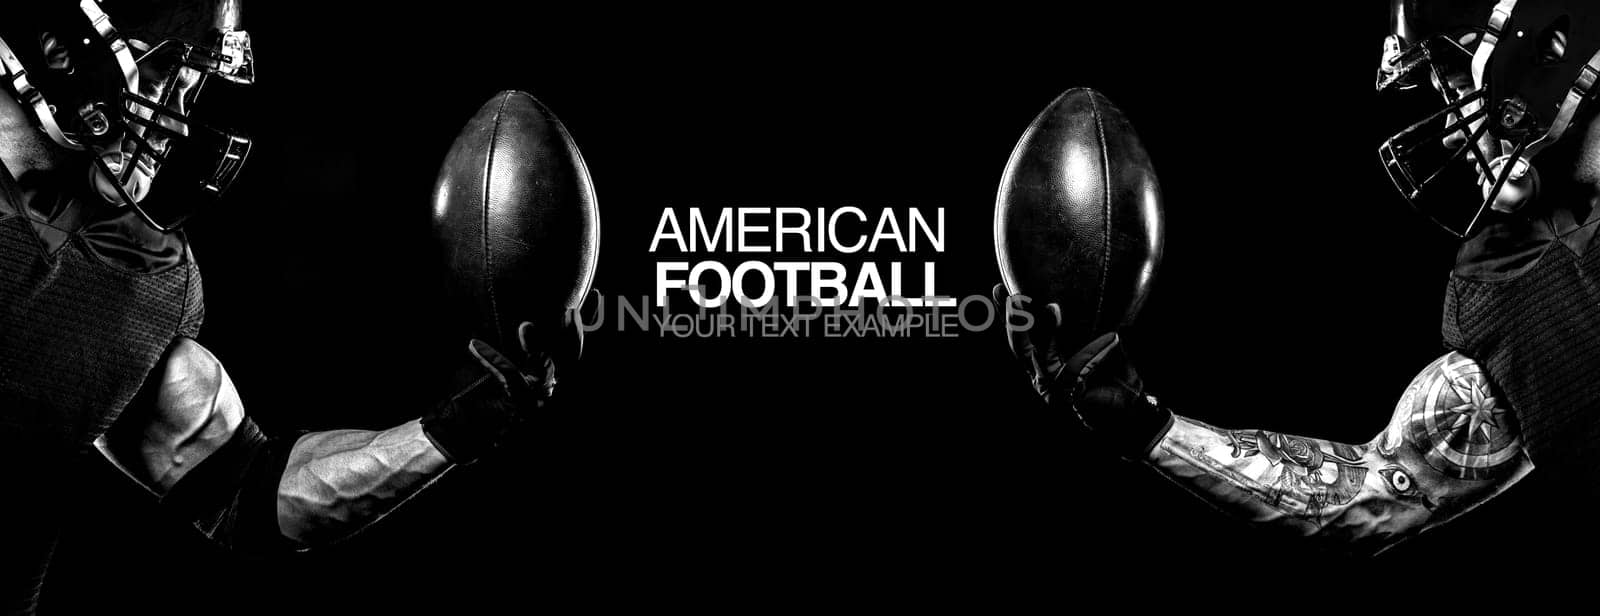 American Football player on black background with copy space